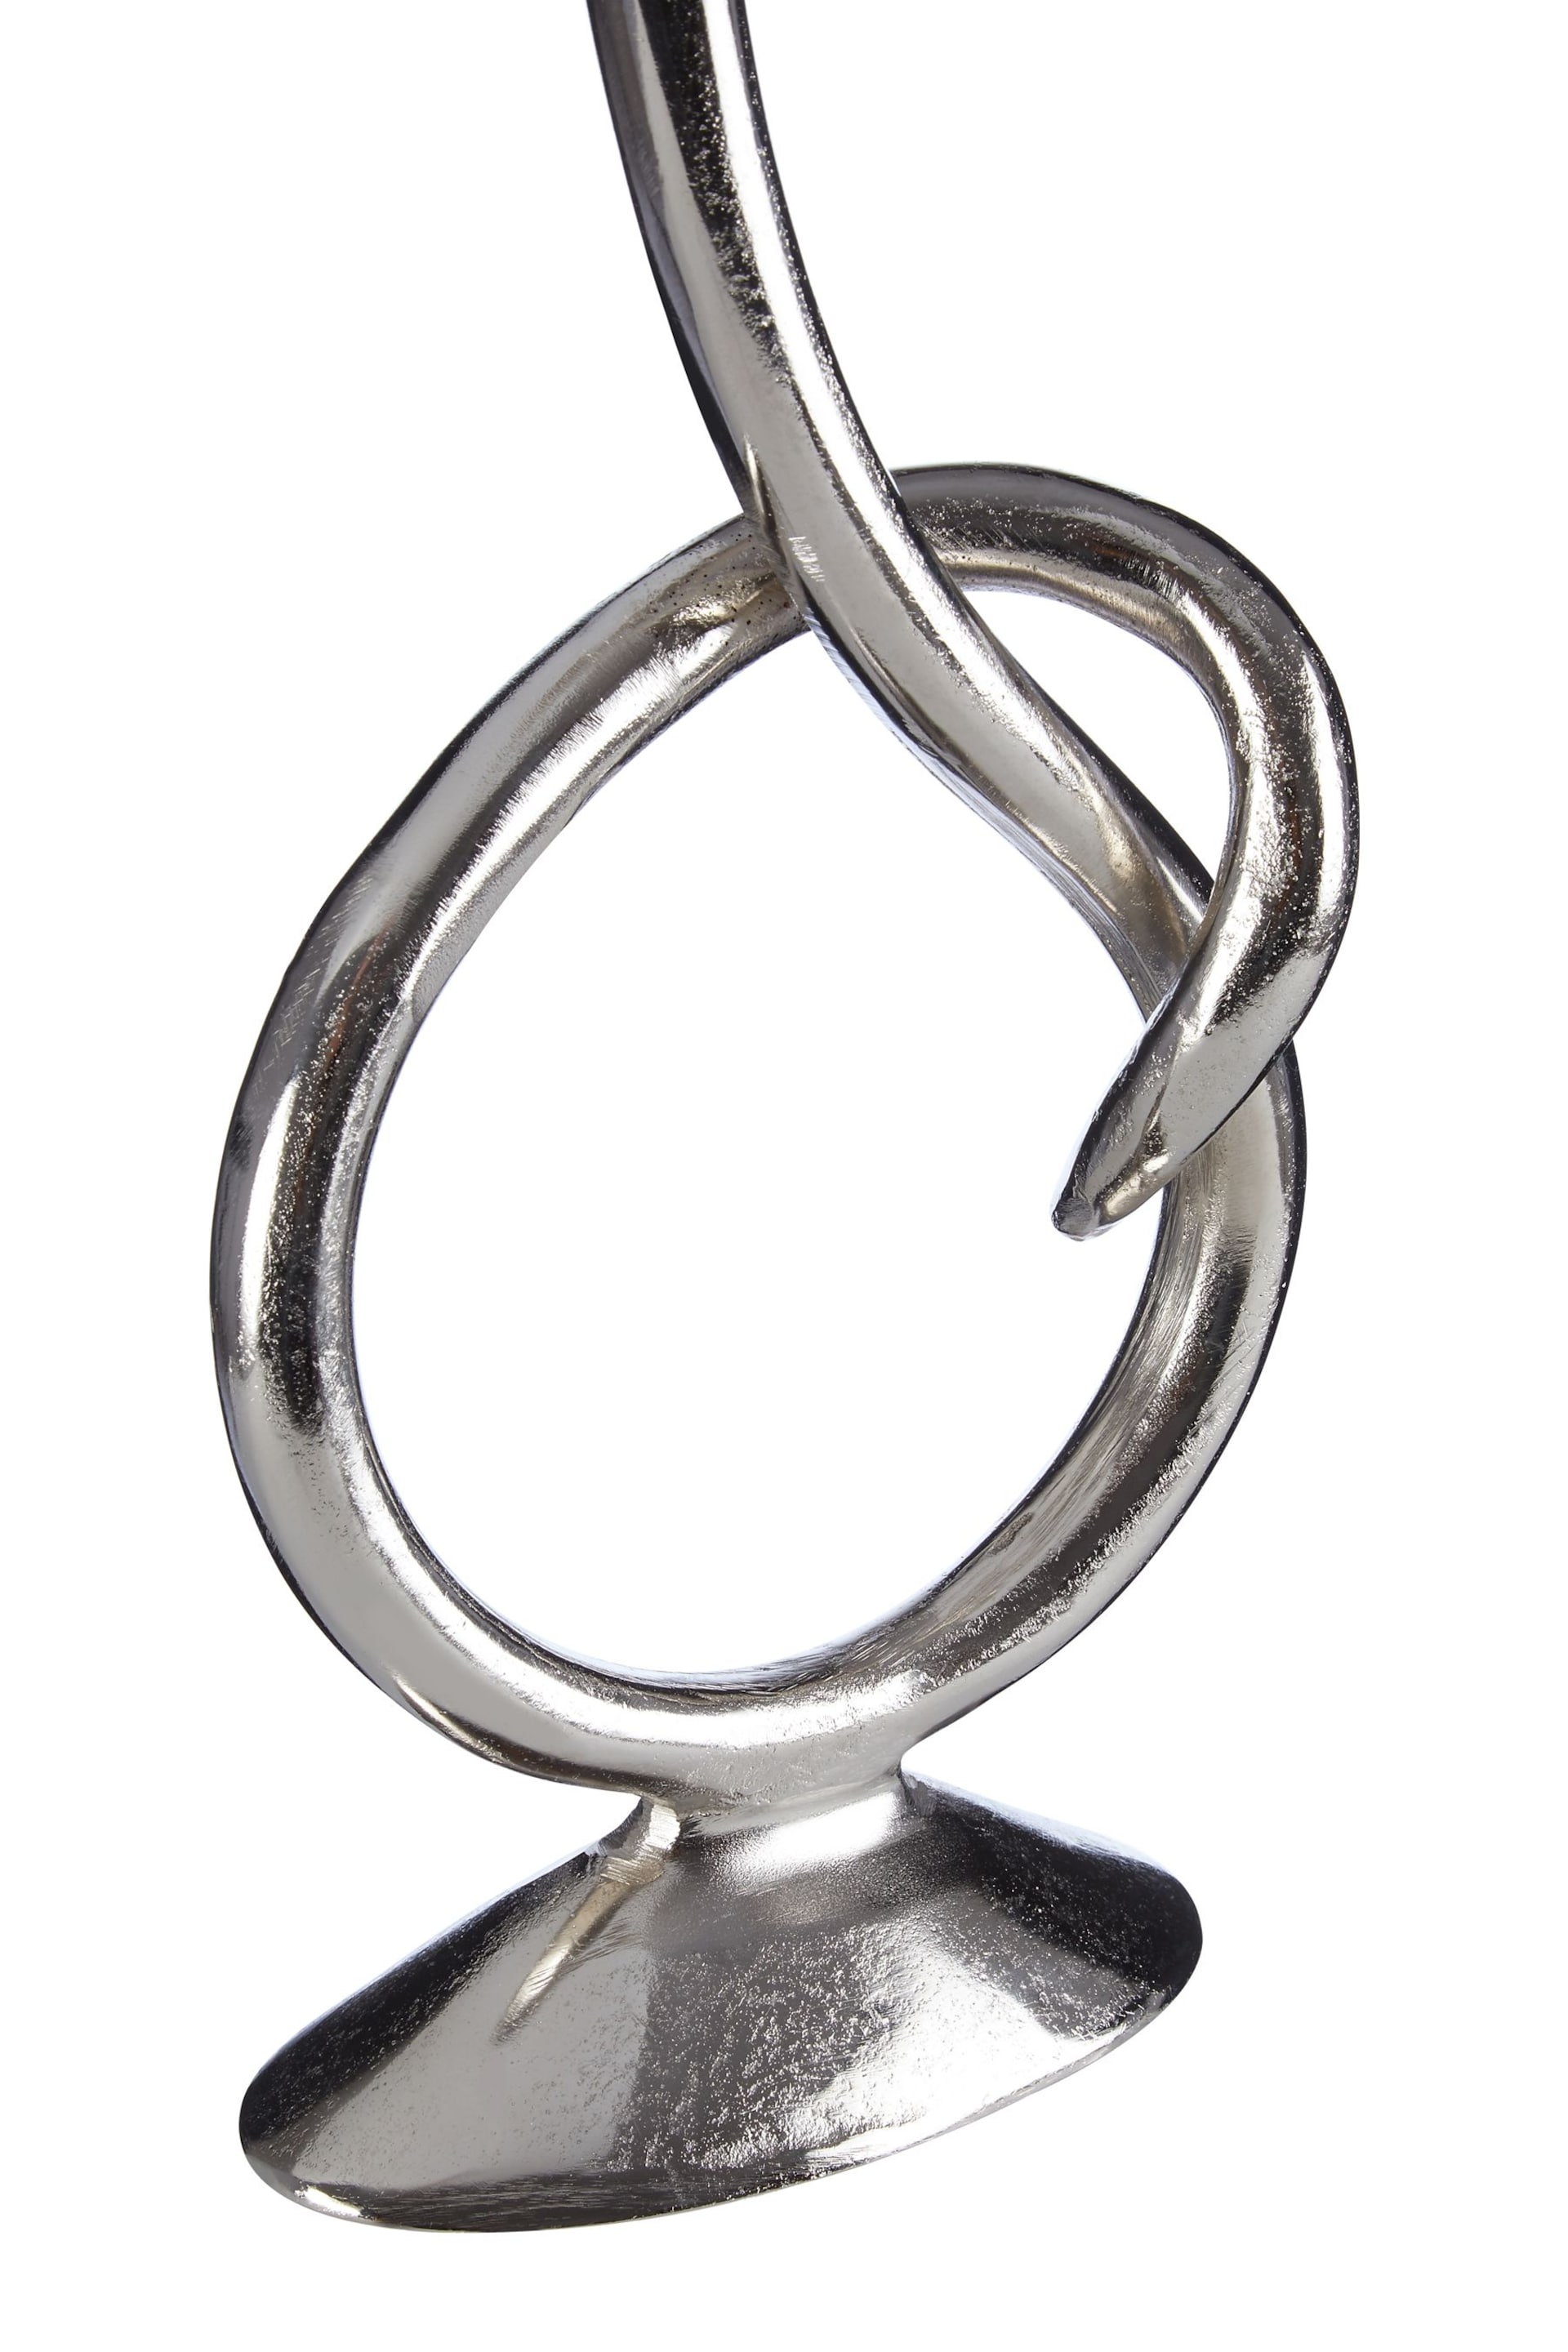 Fifty Five South White Twist Candle Holder - Image 4 of 4